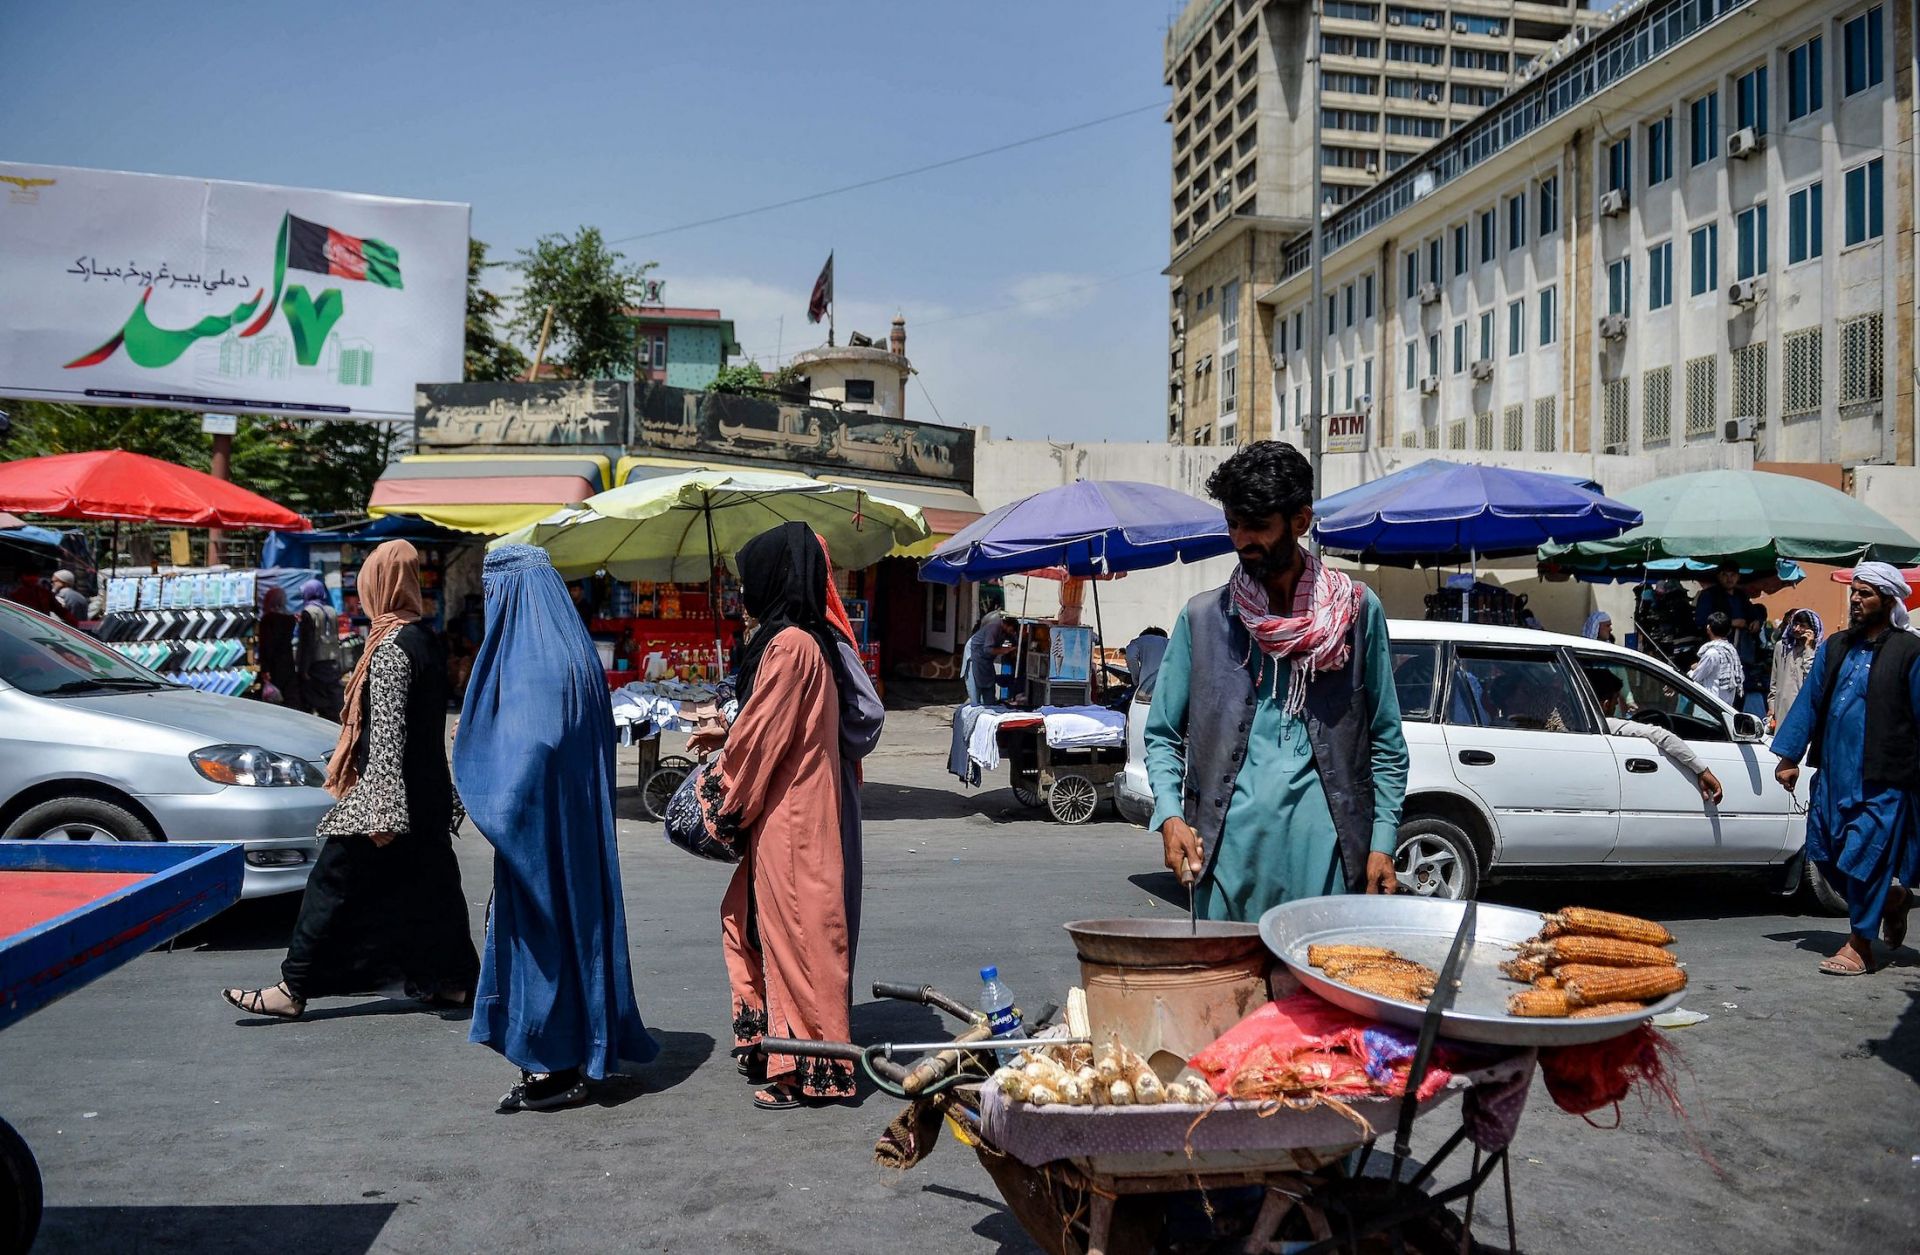 Afghan women shop at a market area in Kabul on Aug. 23, 2021, following the Taliban's takeover of the country.